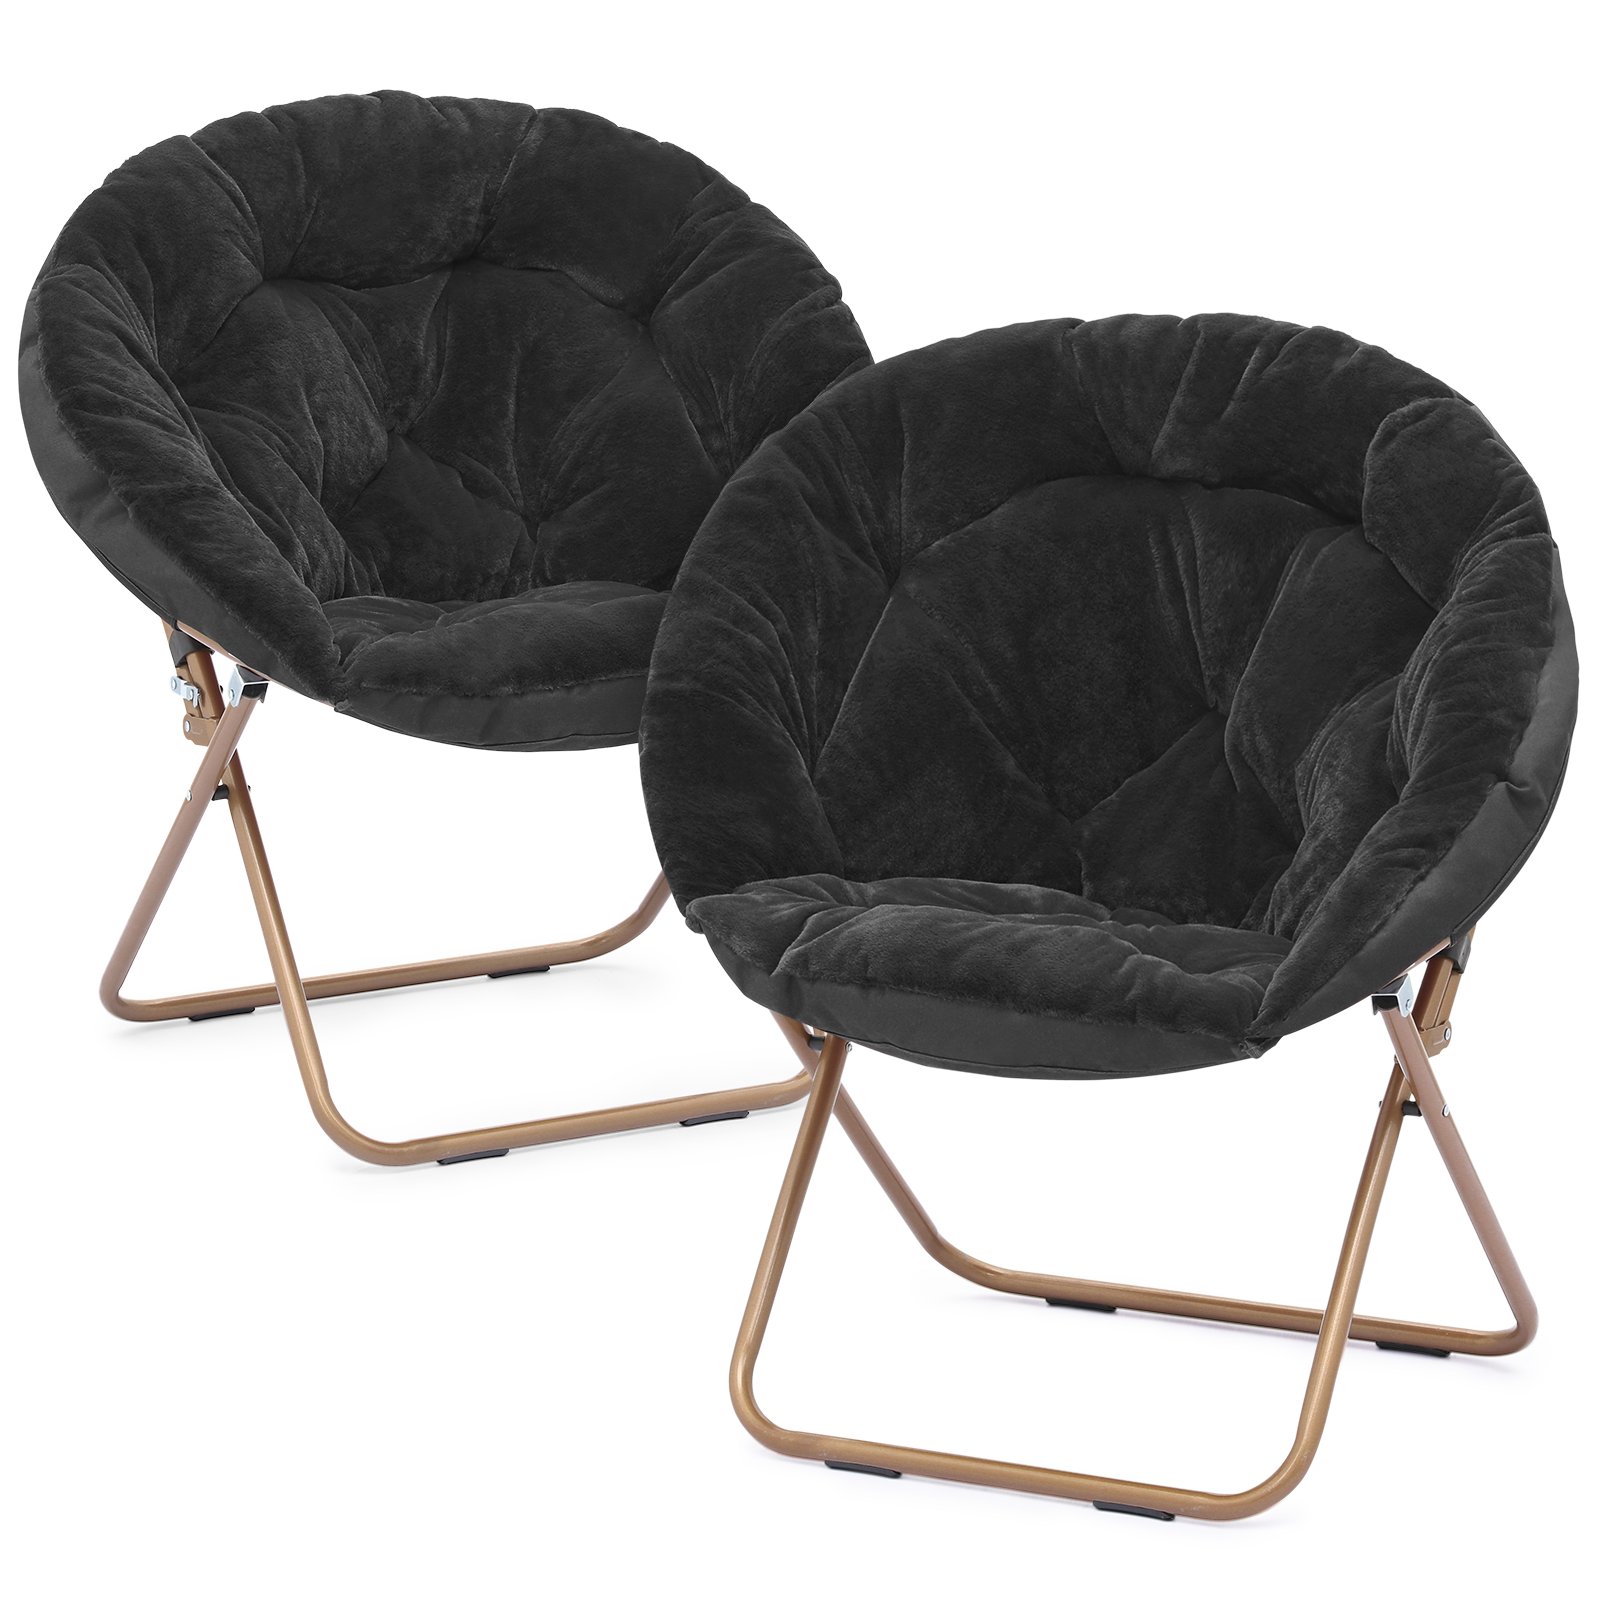 Magshion Set of 2 Saucer Chair Soft Faux Fur Folding Accent Chair, Lounge Lazy Chair Moon Chair Seat with Metal Frame for Bedroom Living Room, Black - image 1 of 10